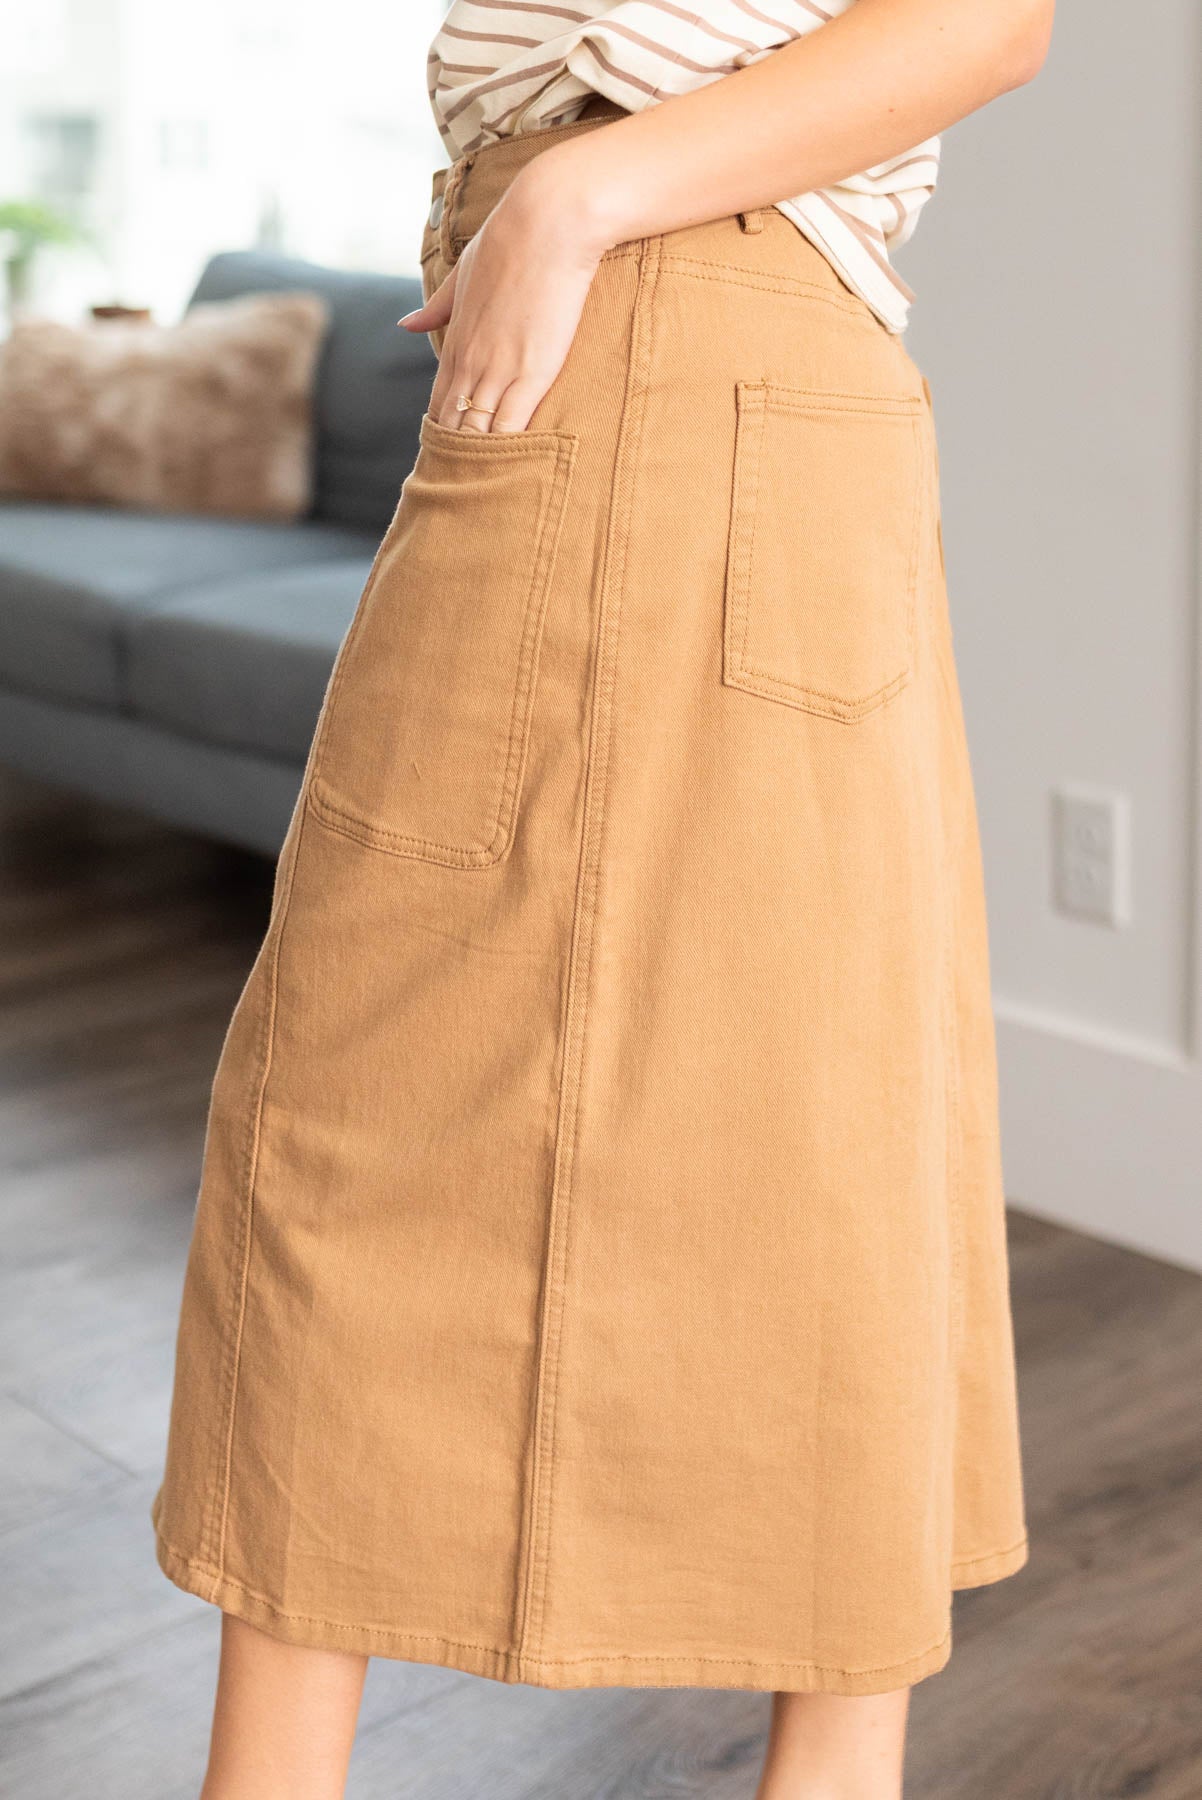 Side view of the camel maxi skirt